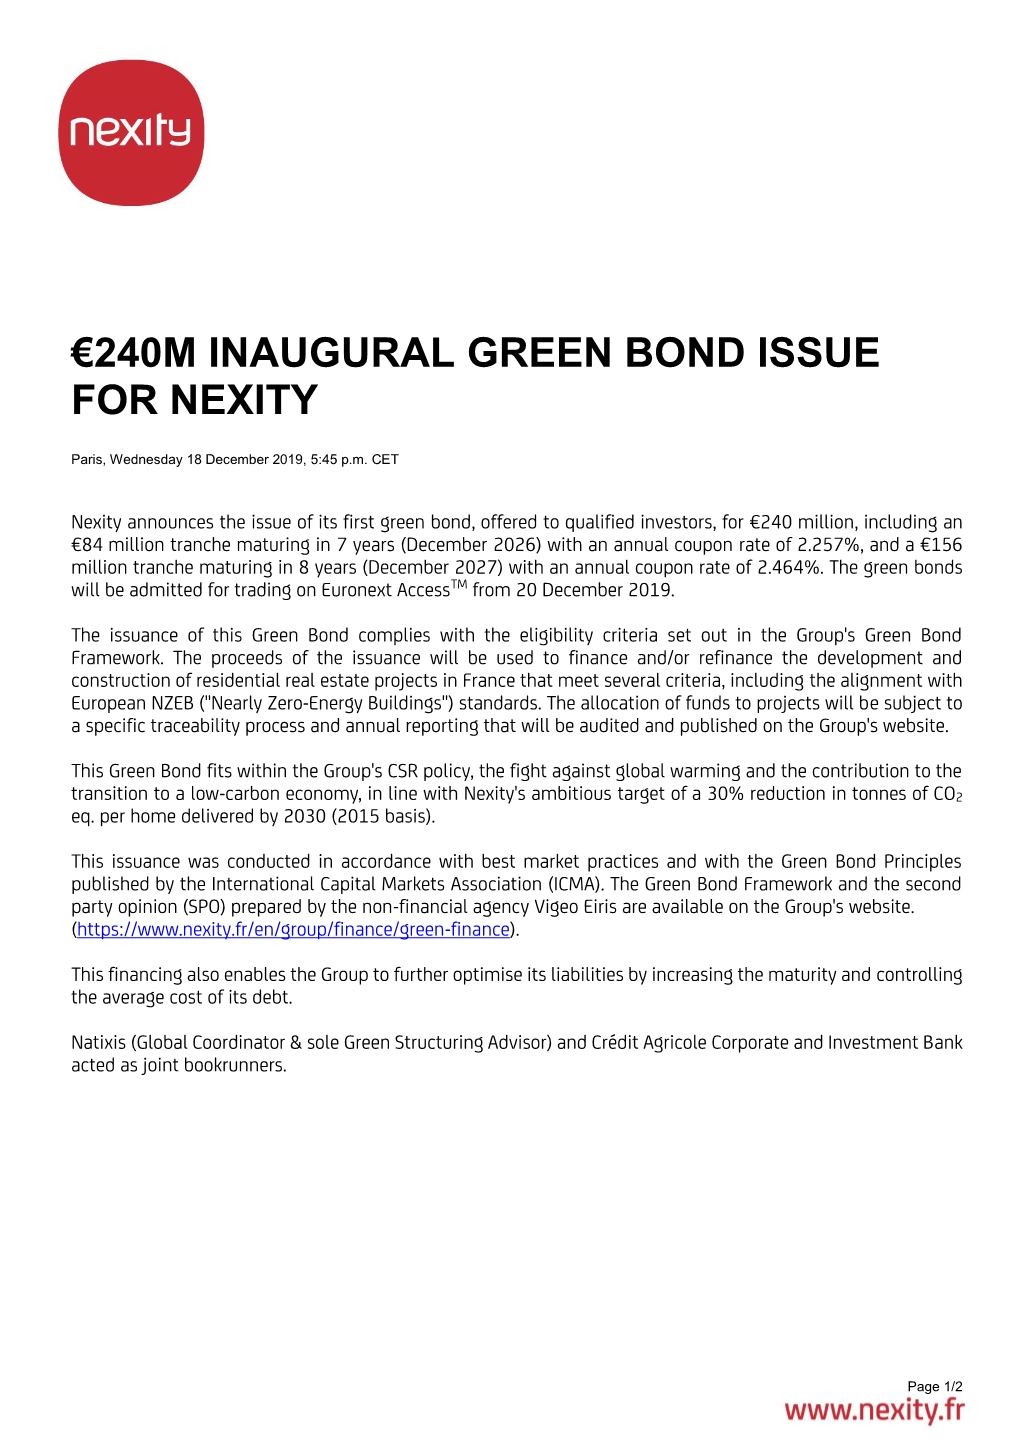 €240M Inaugural Green Bond Issue for Nexity